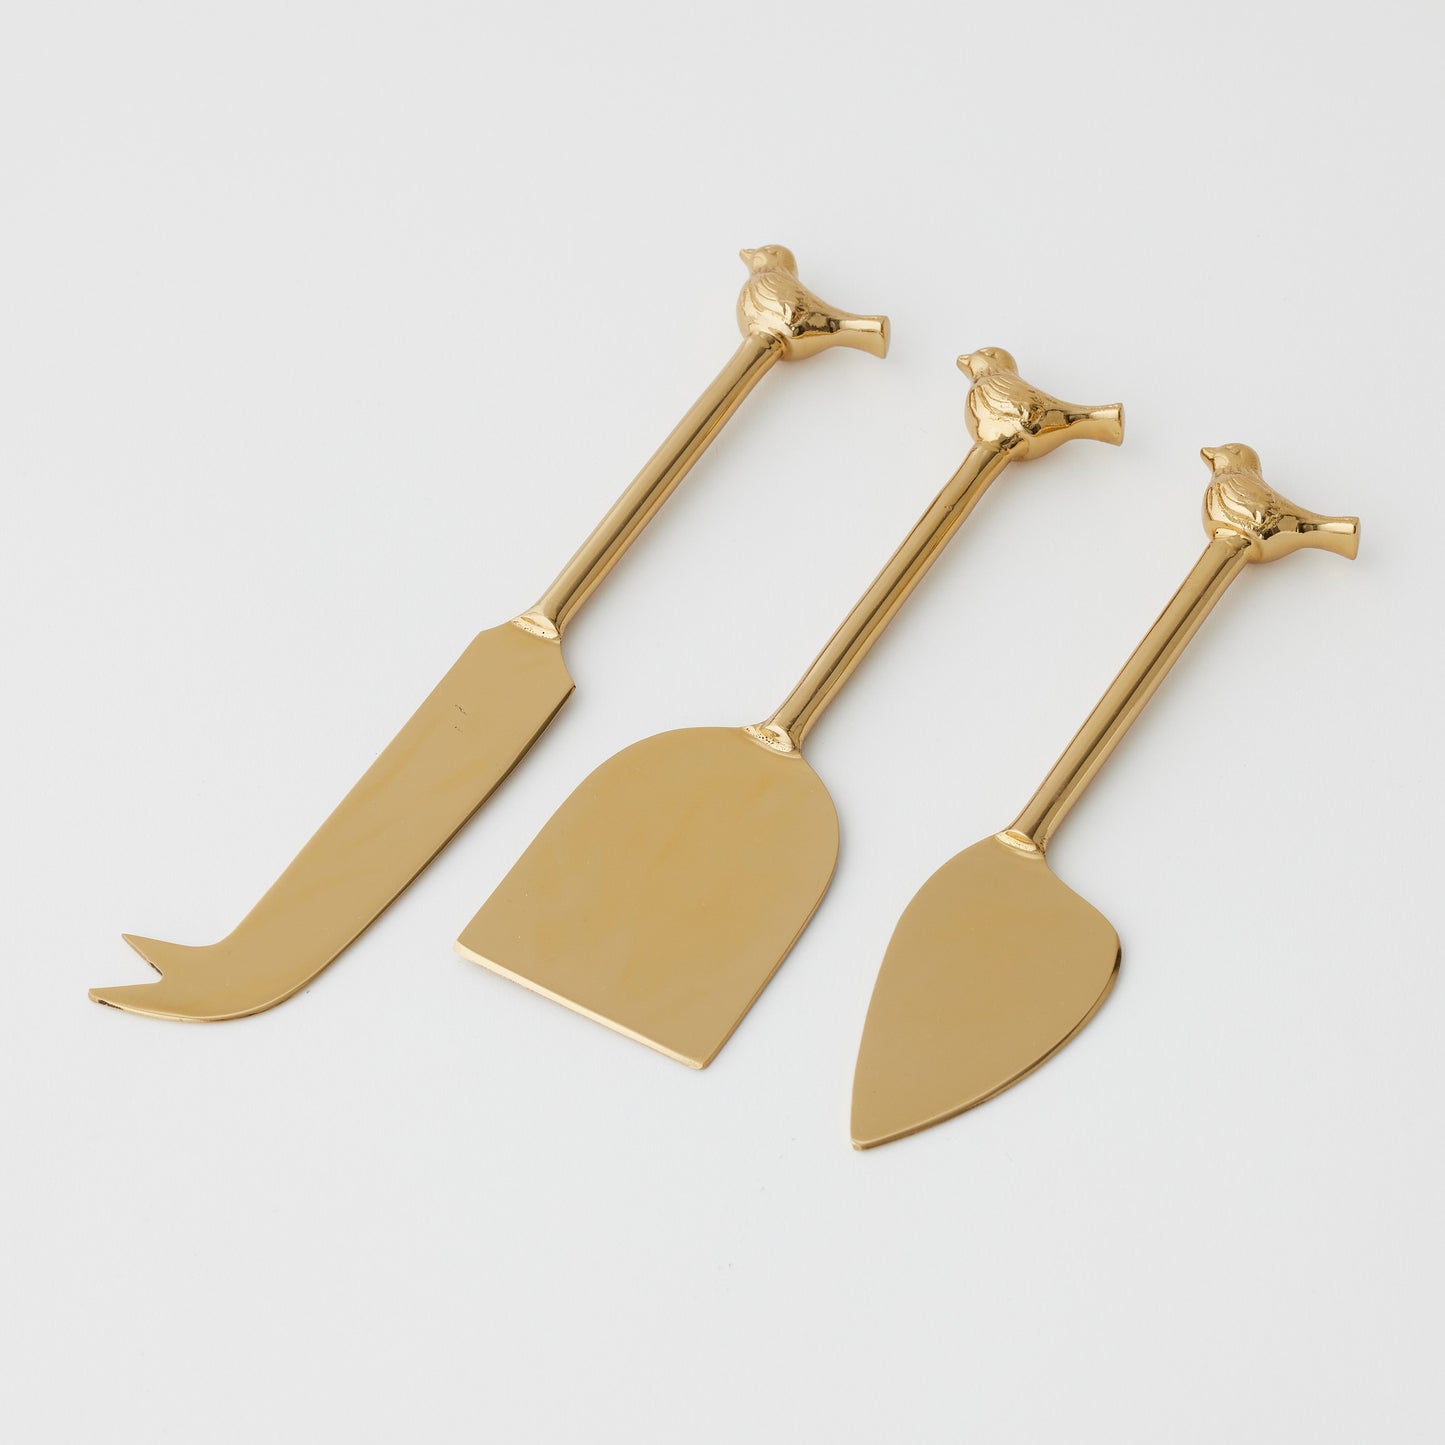 Cheese Knives Set of 3 | Birds